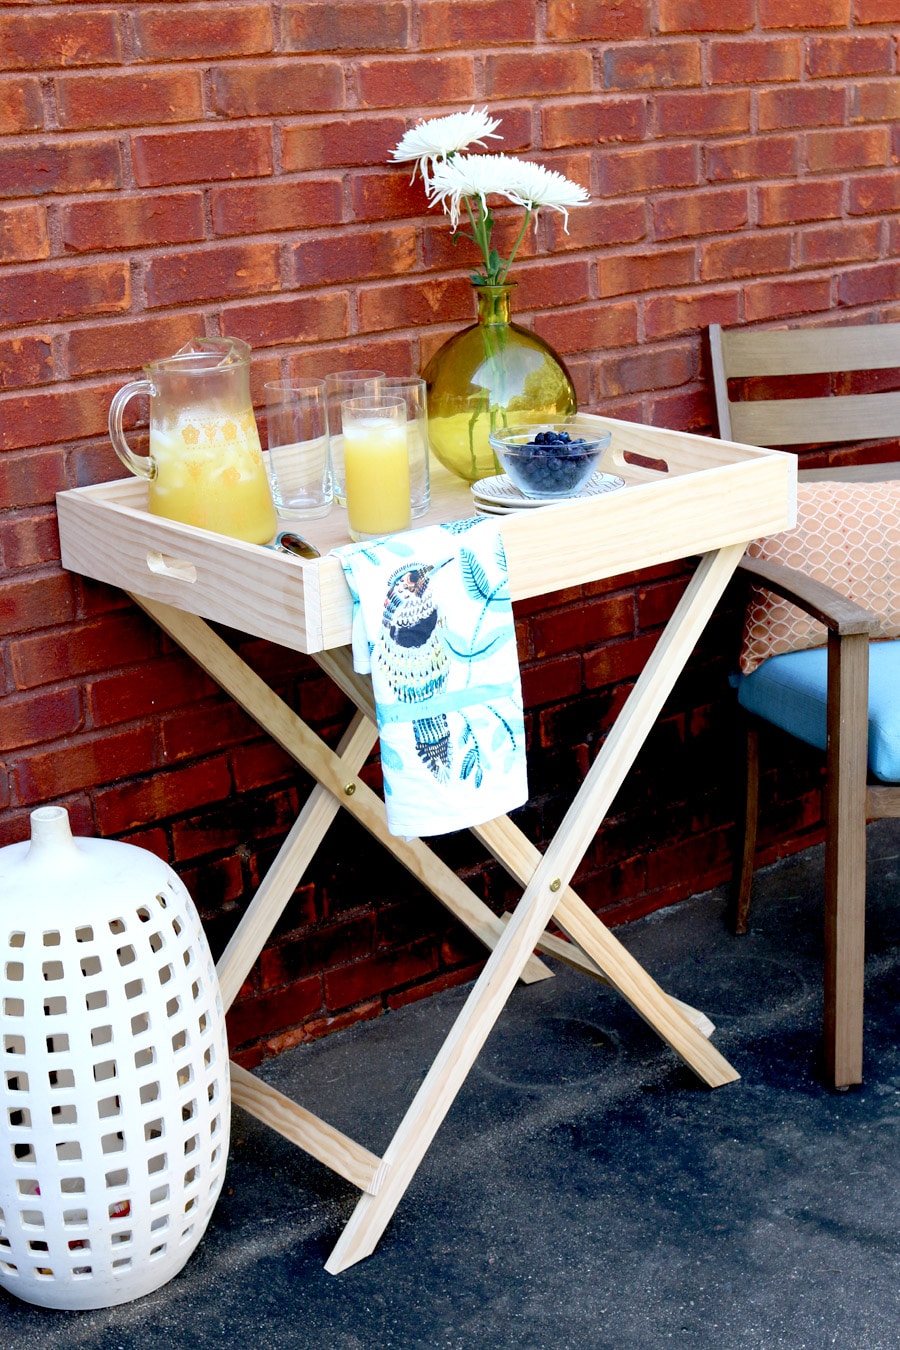 Tutorial on how to build a DIY West Elm Butler Stand